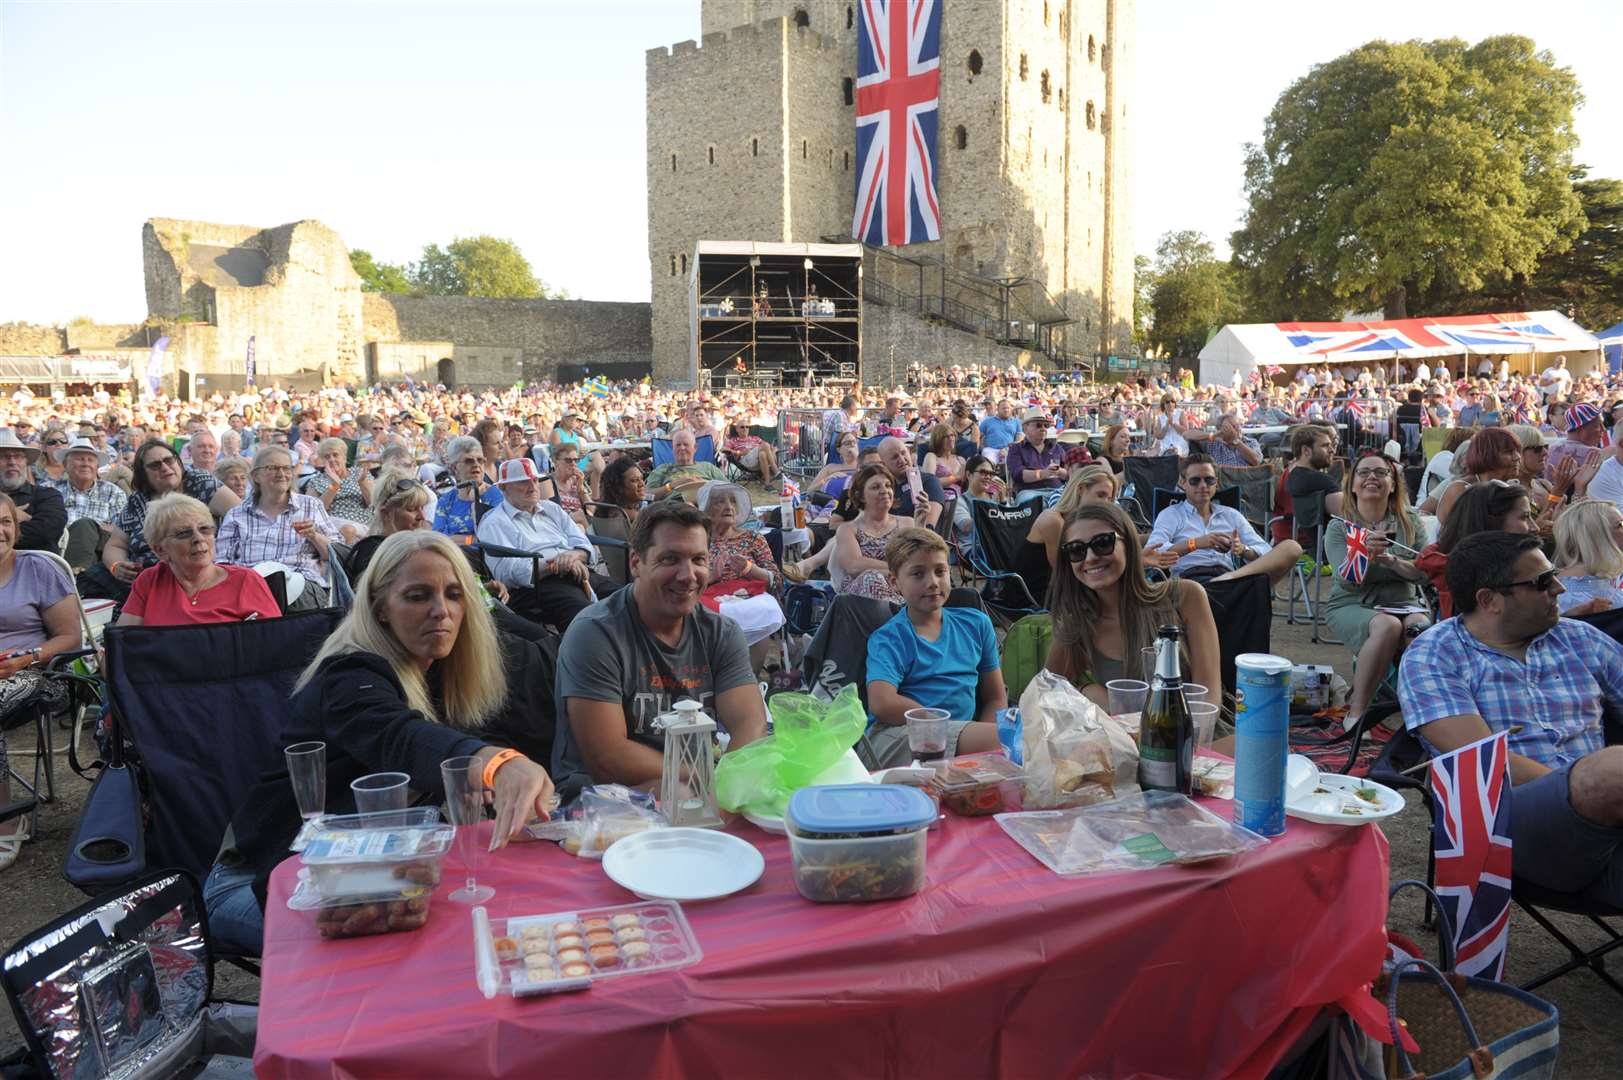 Numbers of people attending Rochester Castle Concerts has dropped since Medway Council told people they couldn't bring their own alcohol in 2018